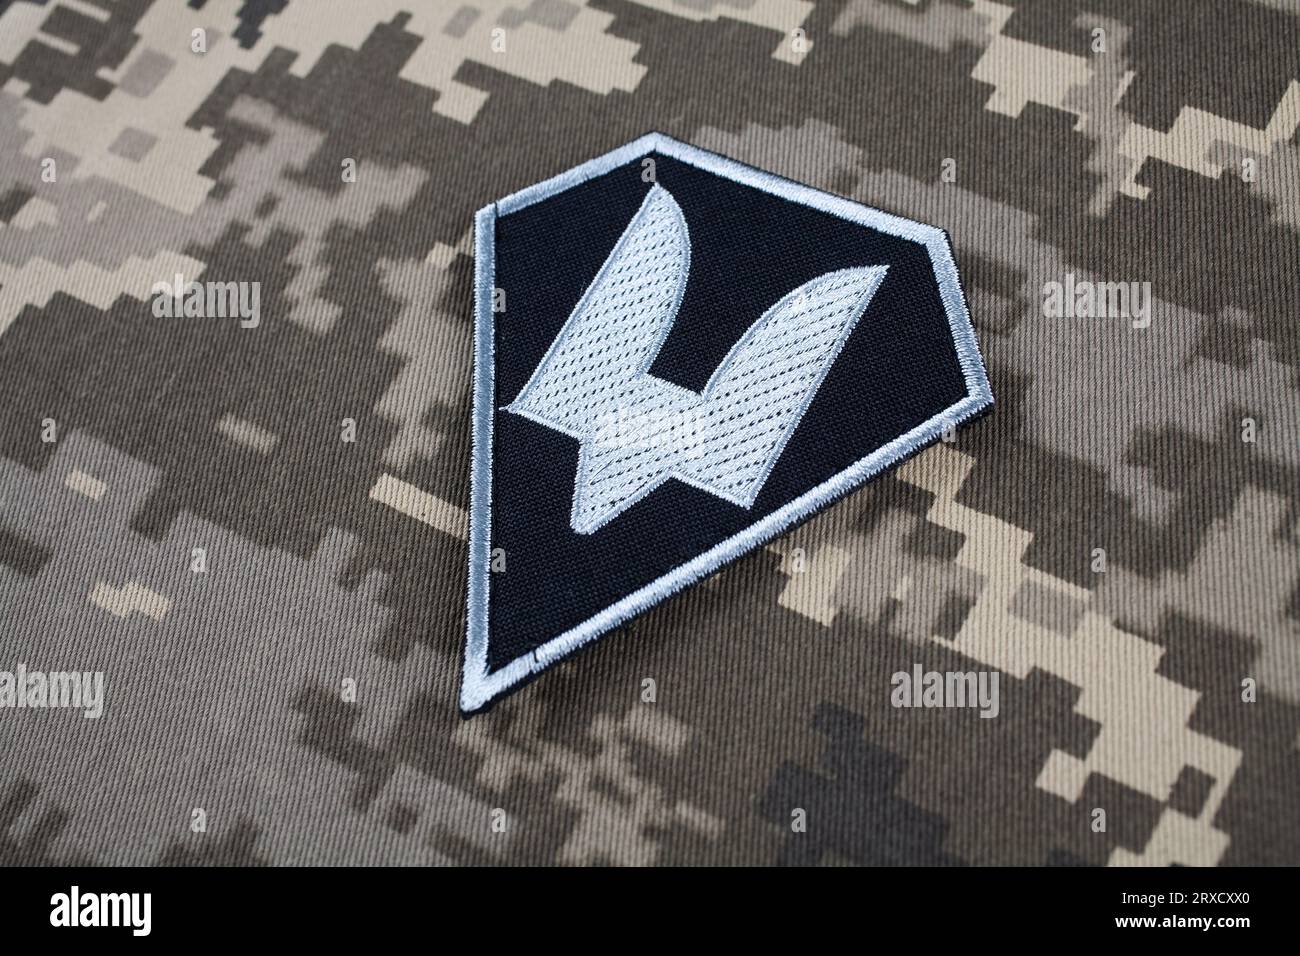 KYIV, UKRAINE - October 5, 2022. Russian invasion in Ukraine 2022. The Special Operations Forces of Ukraine Army uniform shoulder sleeve insignia badg Stock Photo